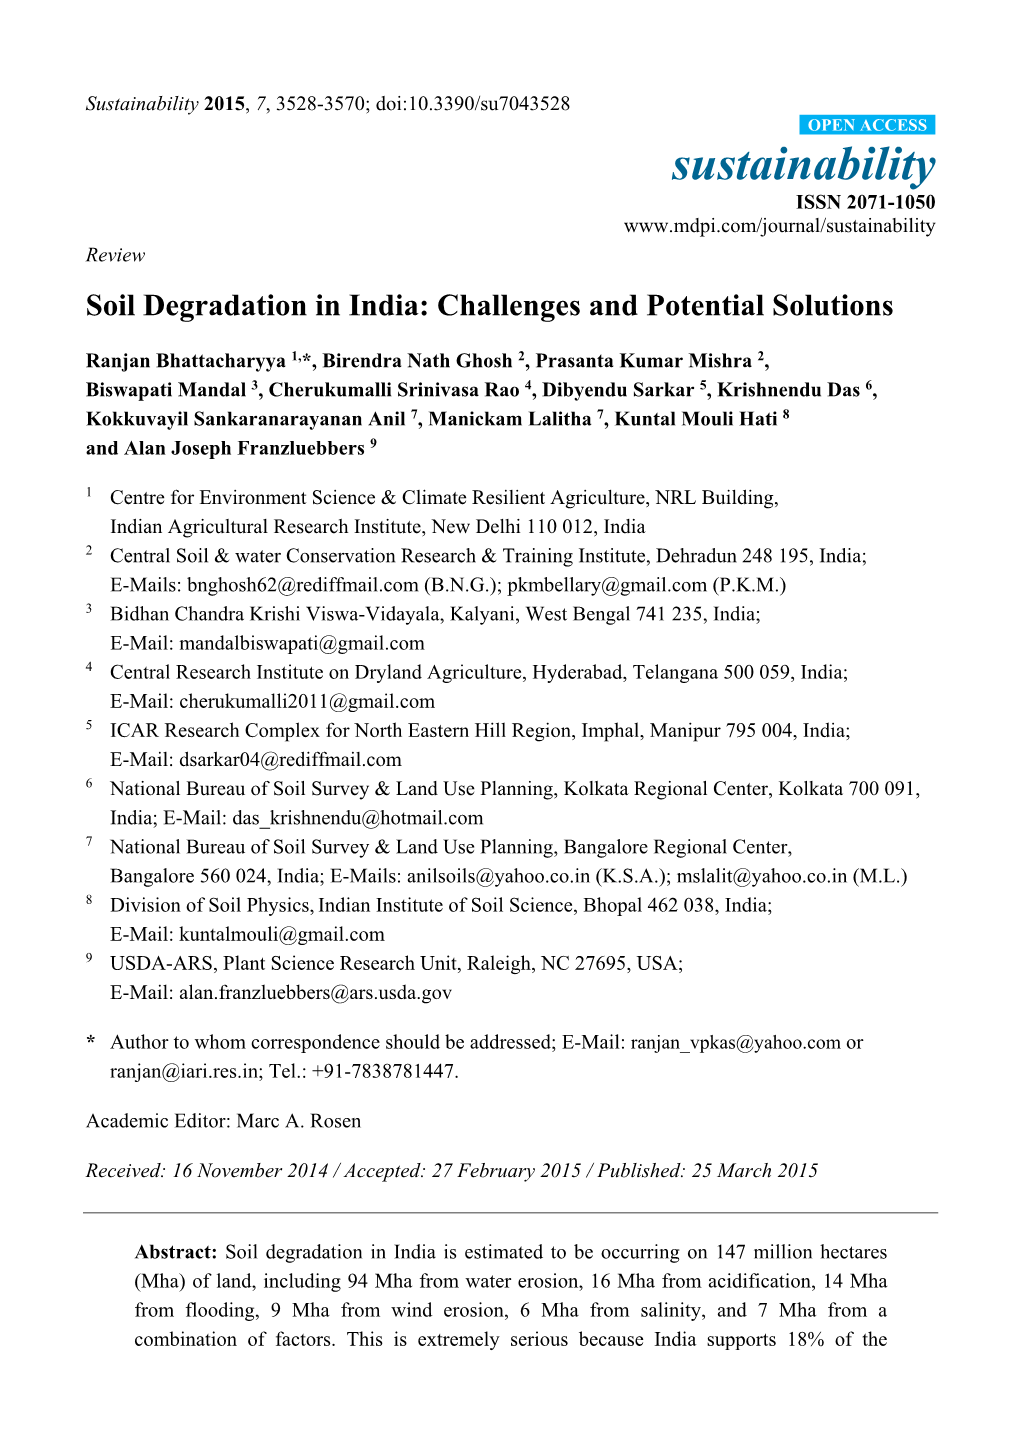 Soil Degradation in India: Challenges and Potential Solutions